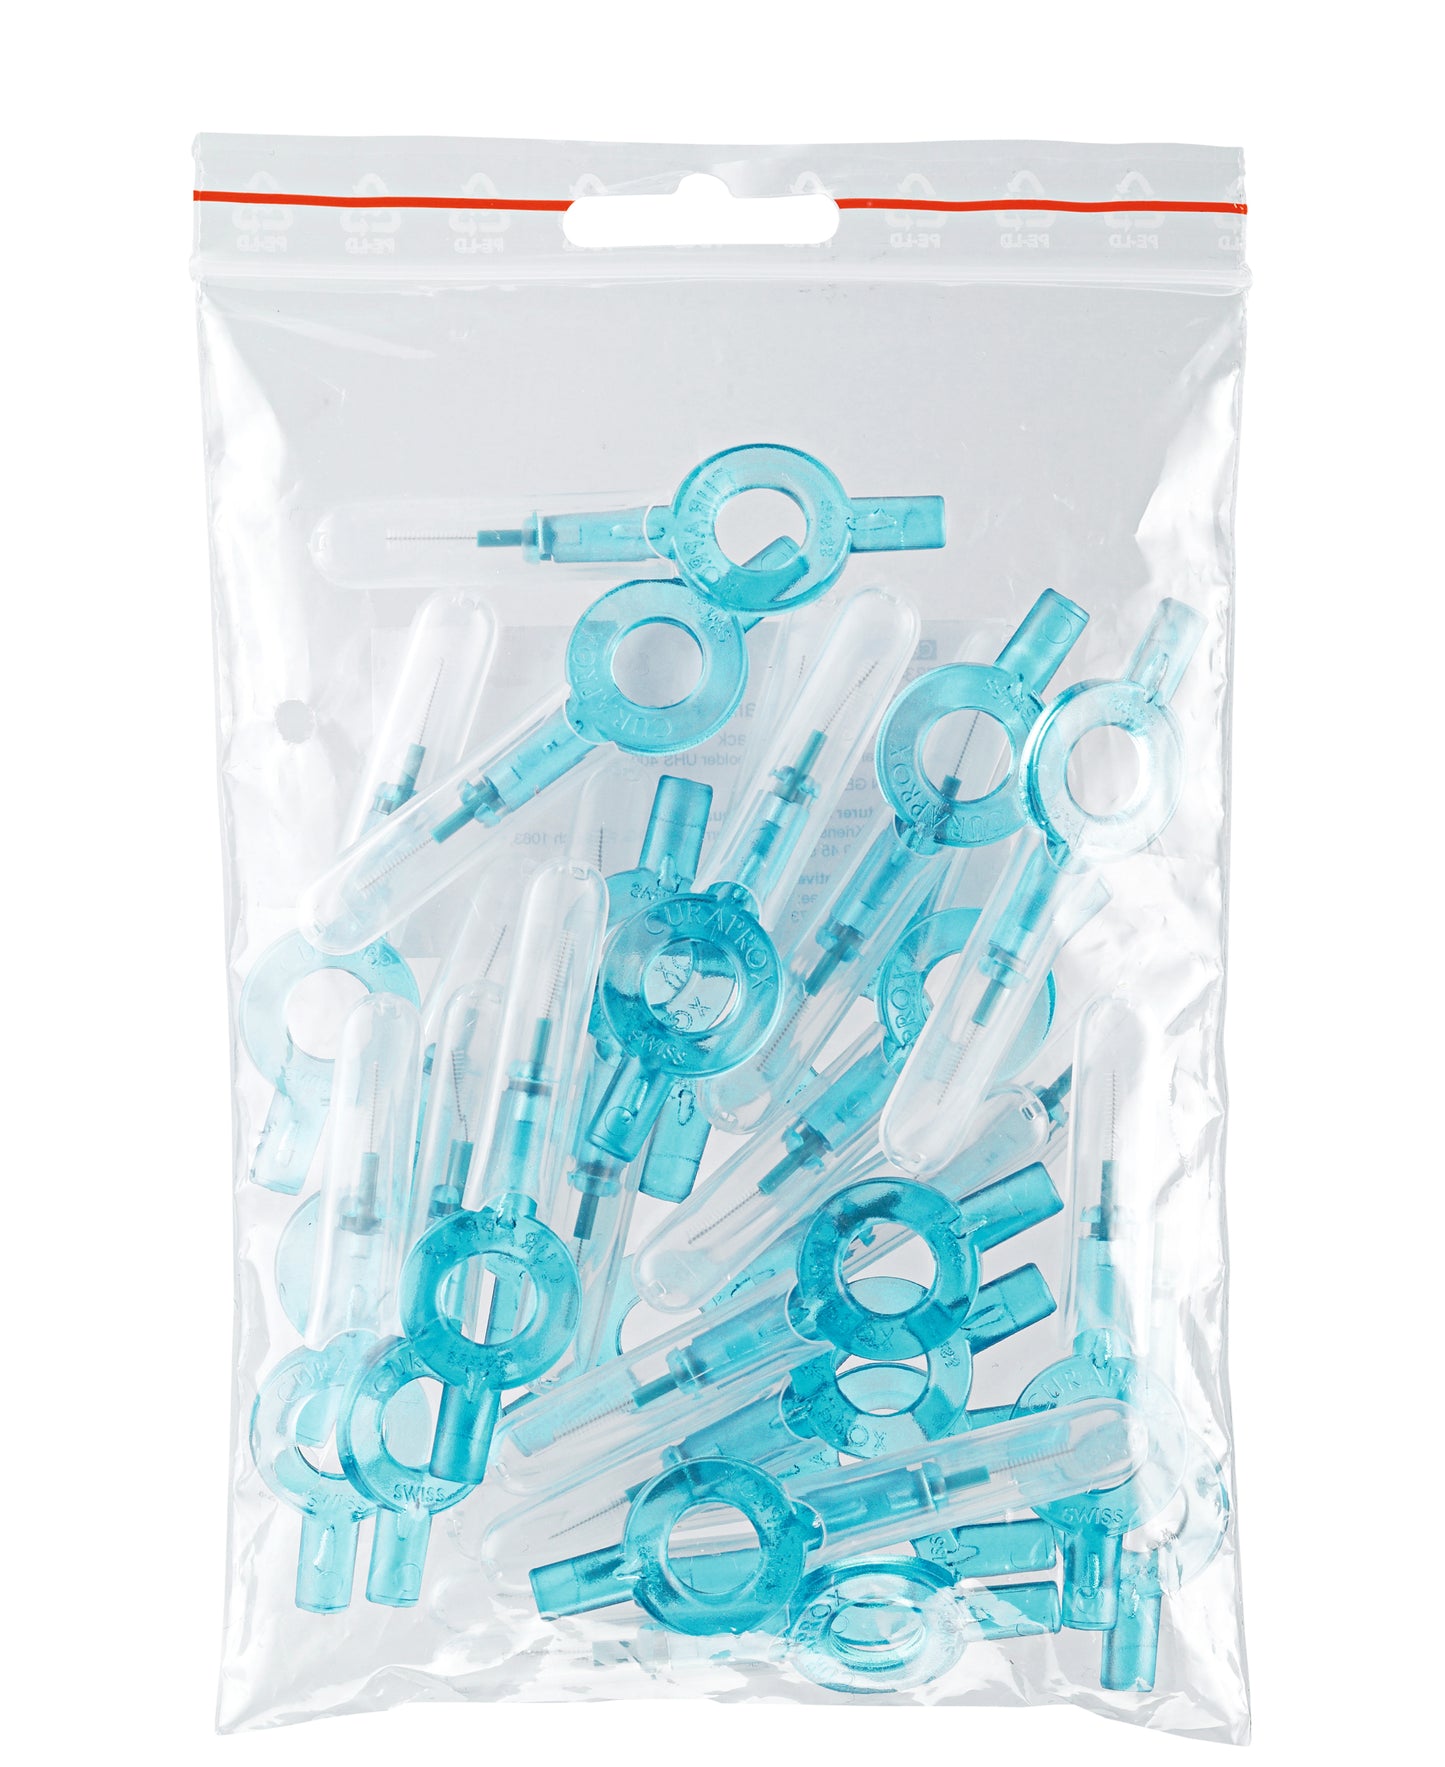 Curaprox Interdental Brushes Cps06 Bag Of 50